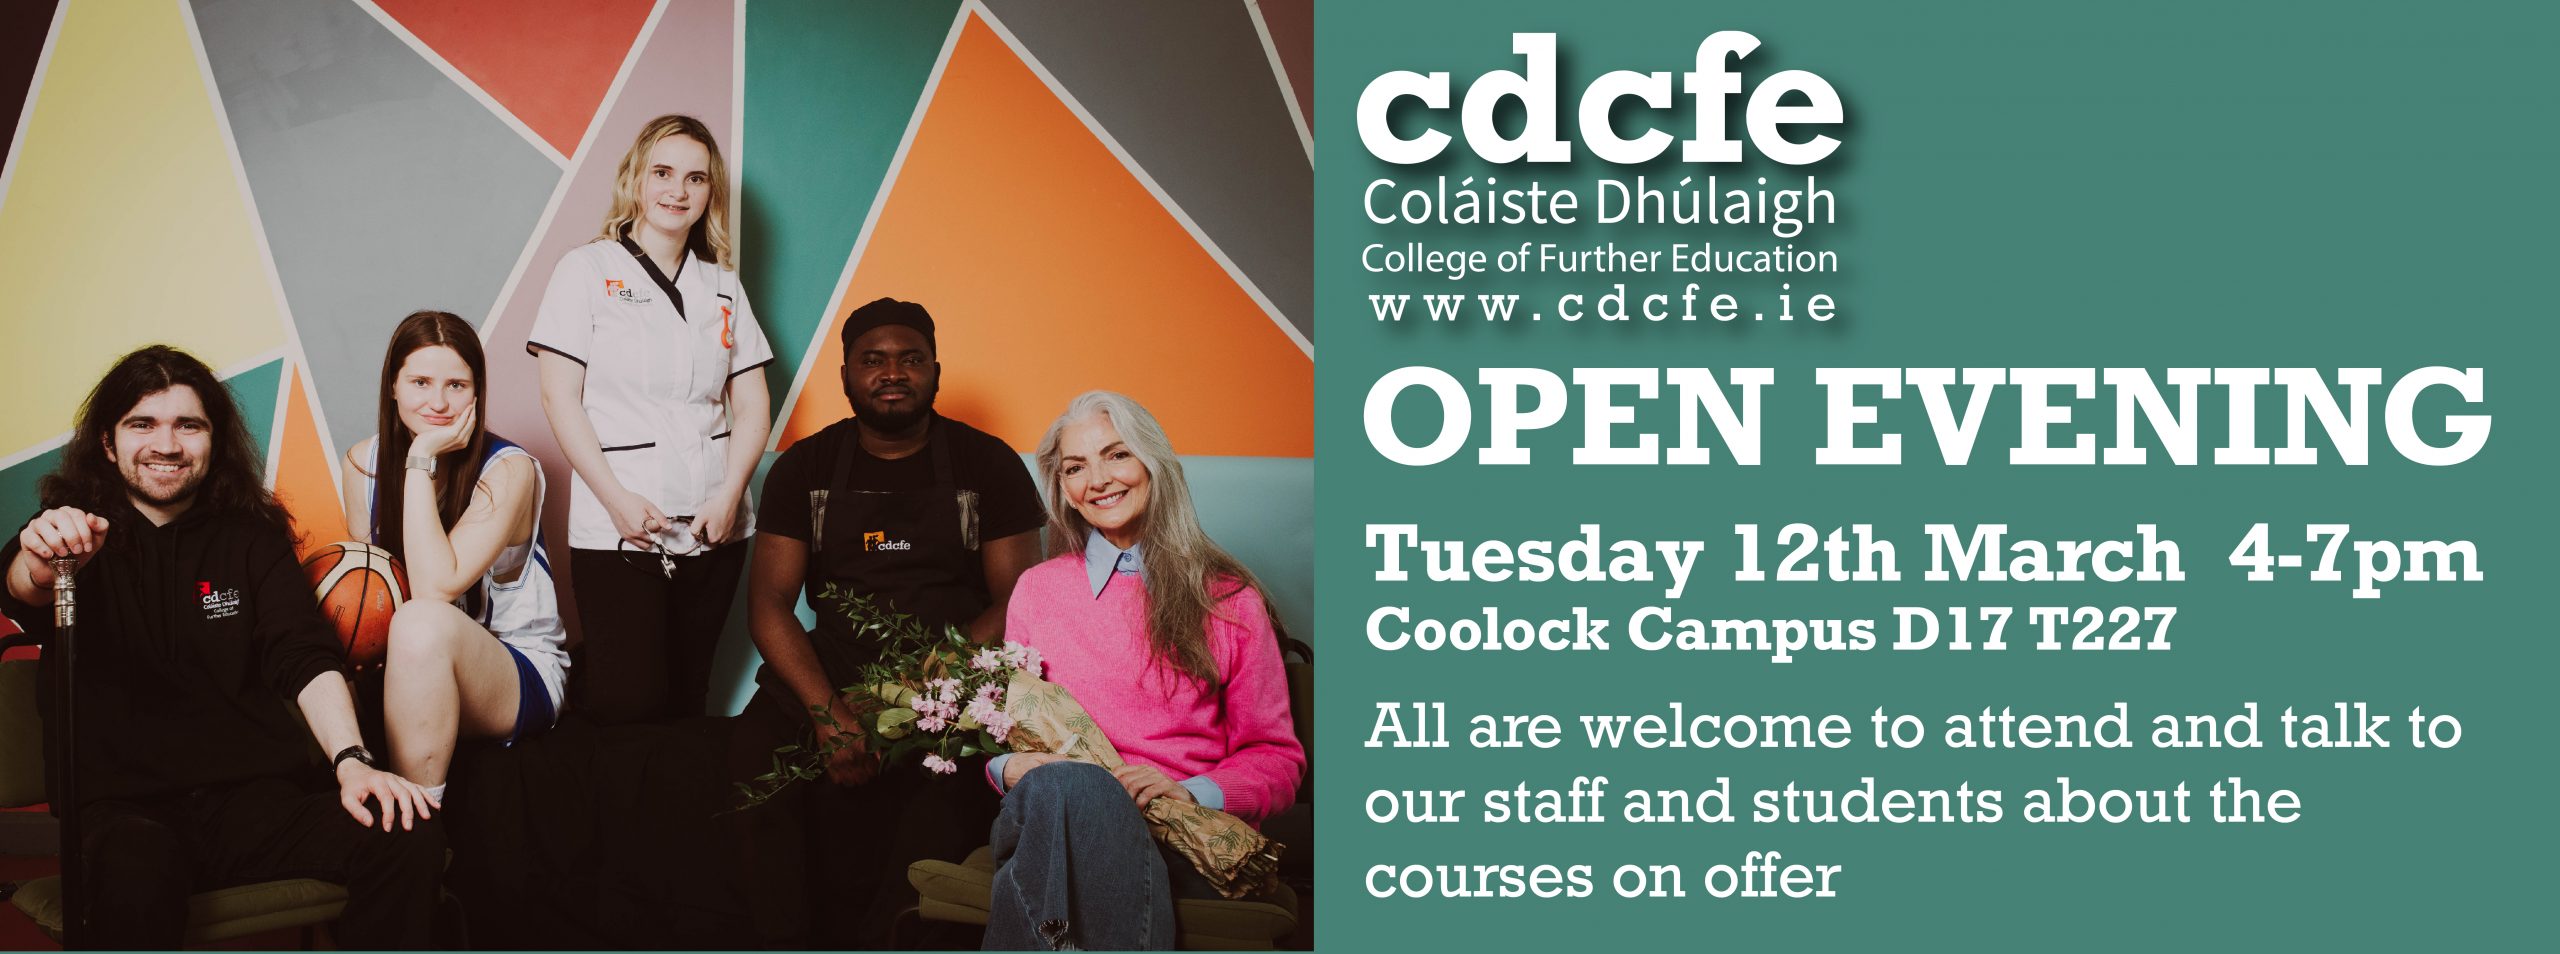 CDCFE Open Evening 12th March